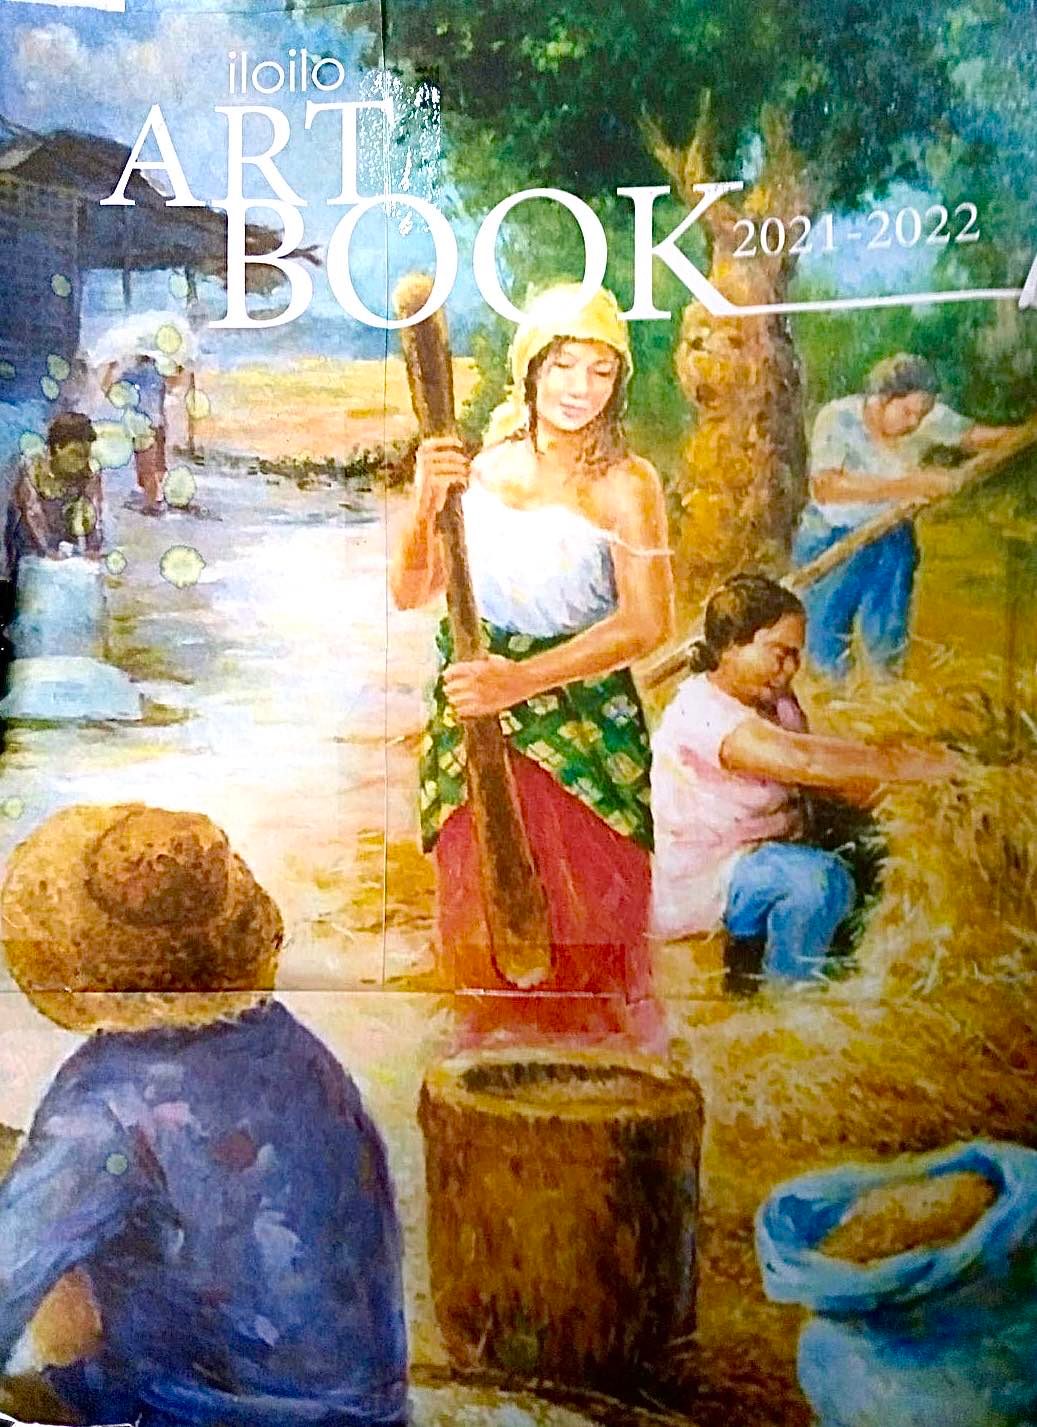 ILOILO ART BOOK to reveal why Iloilo possess the heart and soul for the arts